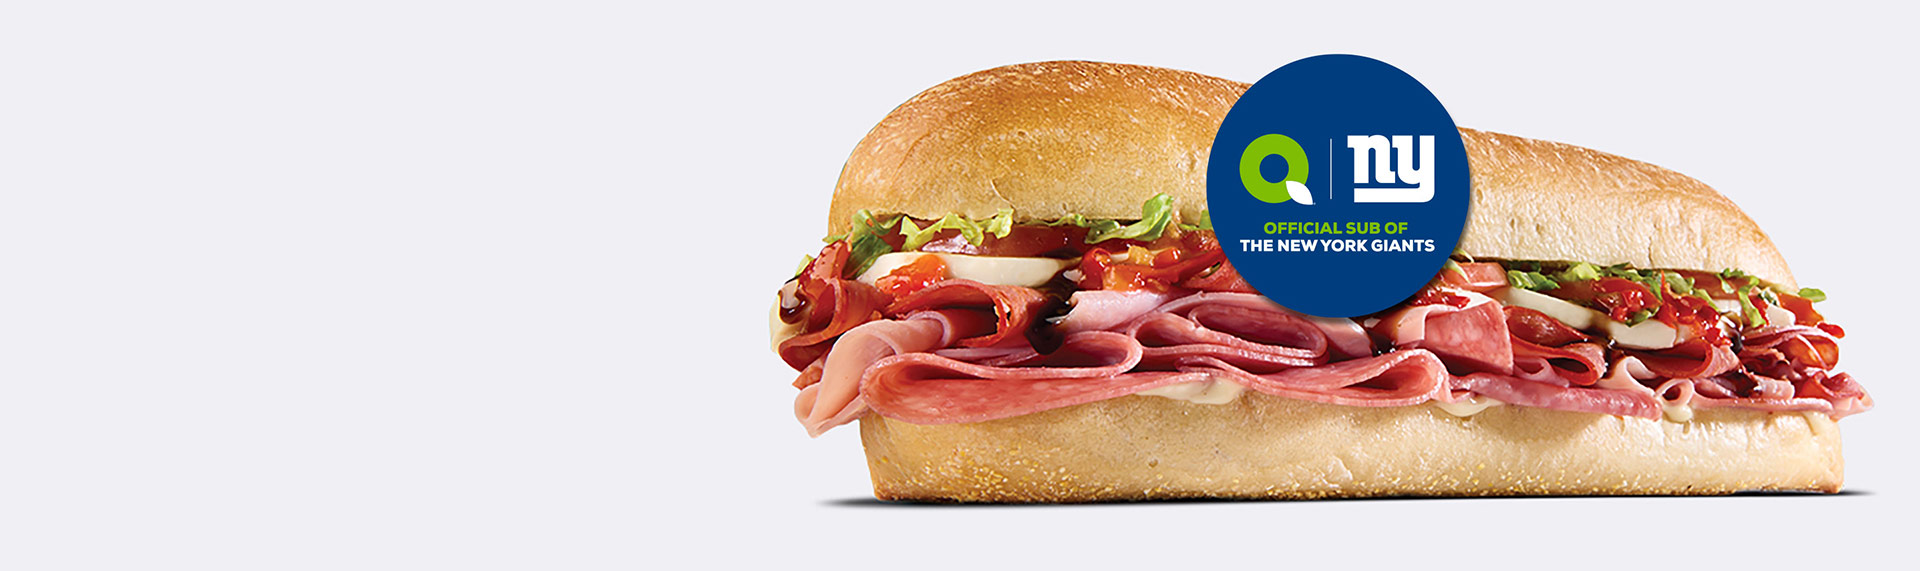 The GIANT Italian Sub - The Official Sub of the New York GIANTS and QuickChek